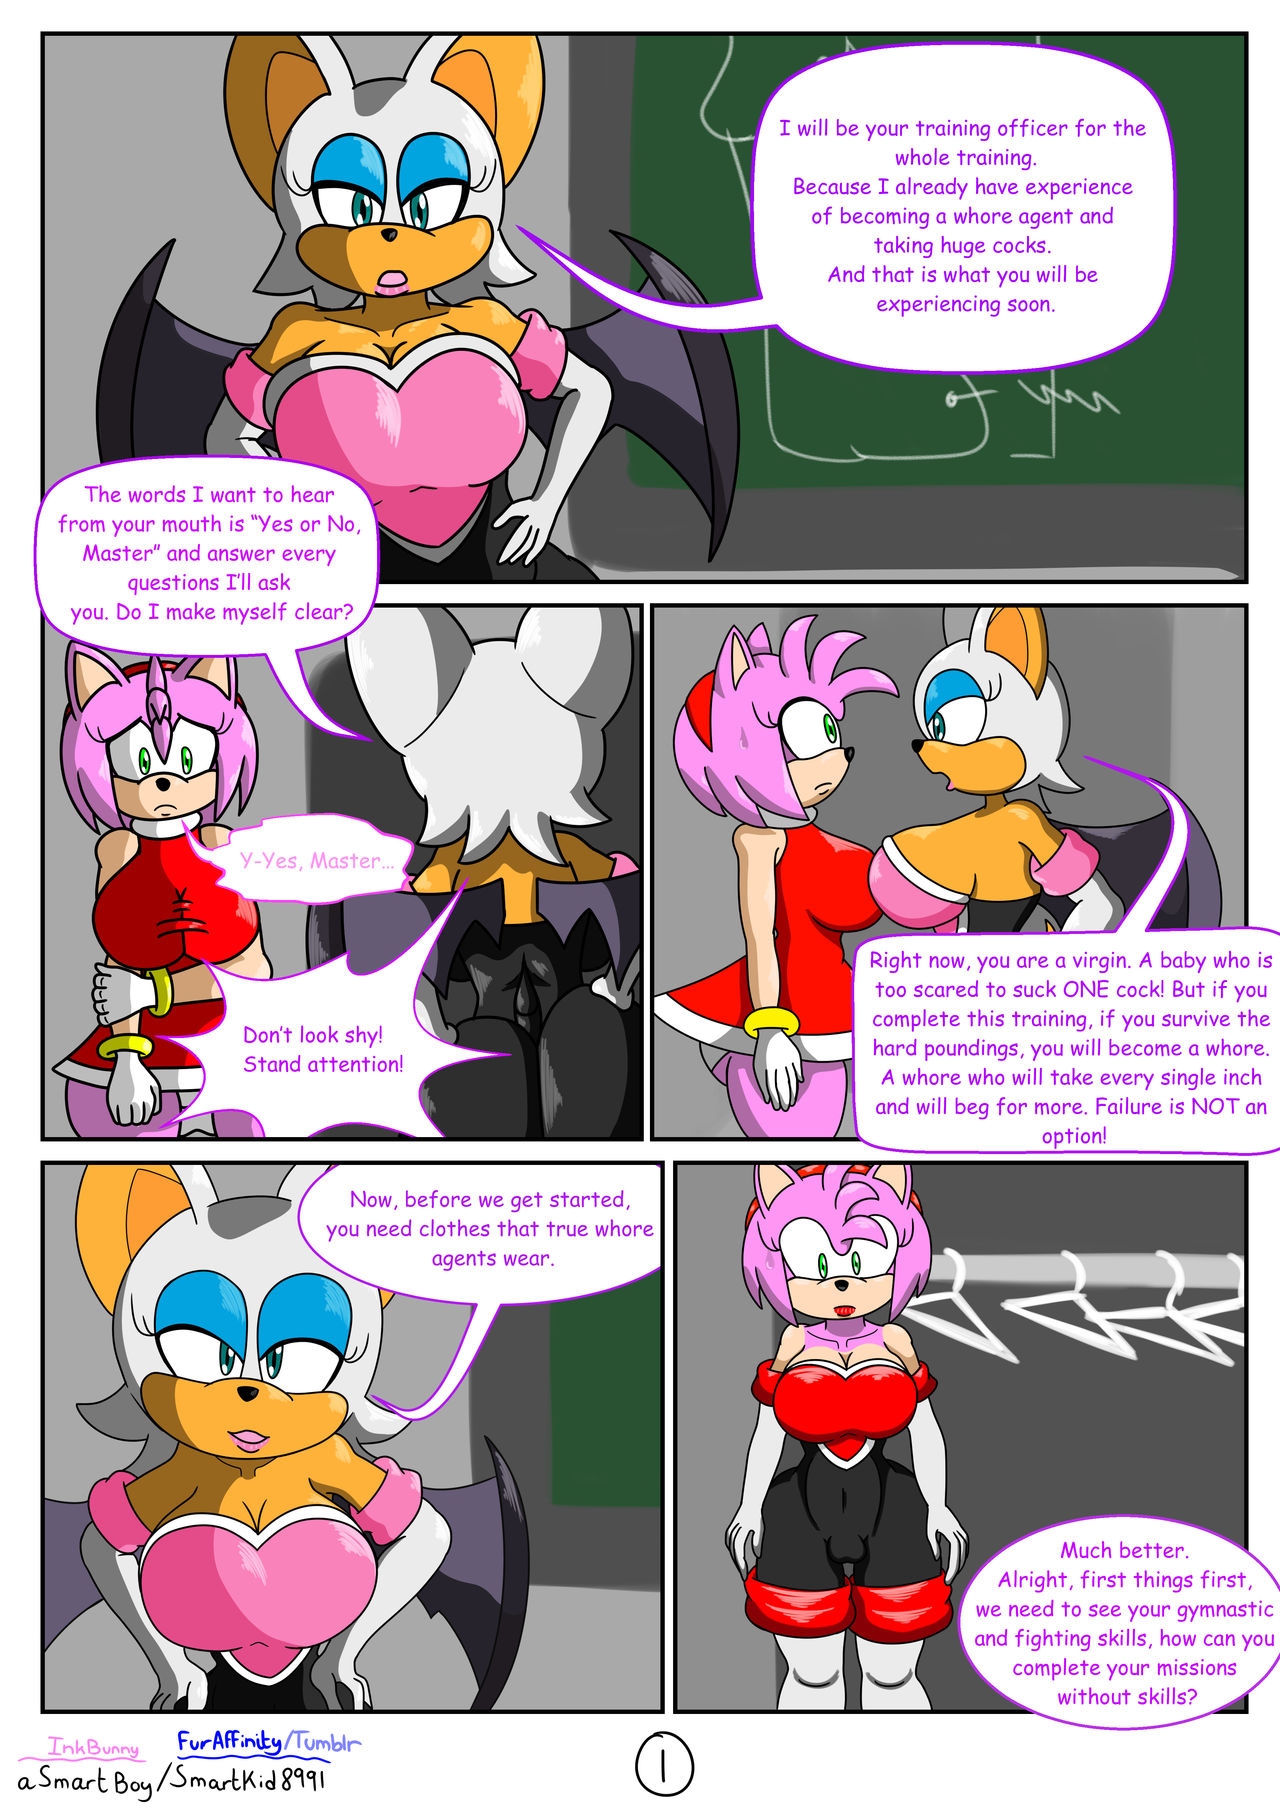 [SmartKid8991] Agent Whore Bootcamp (Sonic The Hedgehog) [Ongoing] 1